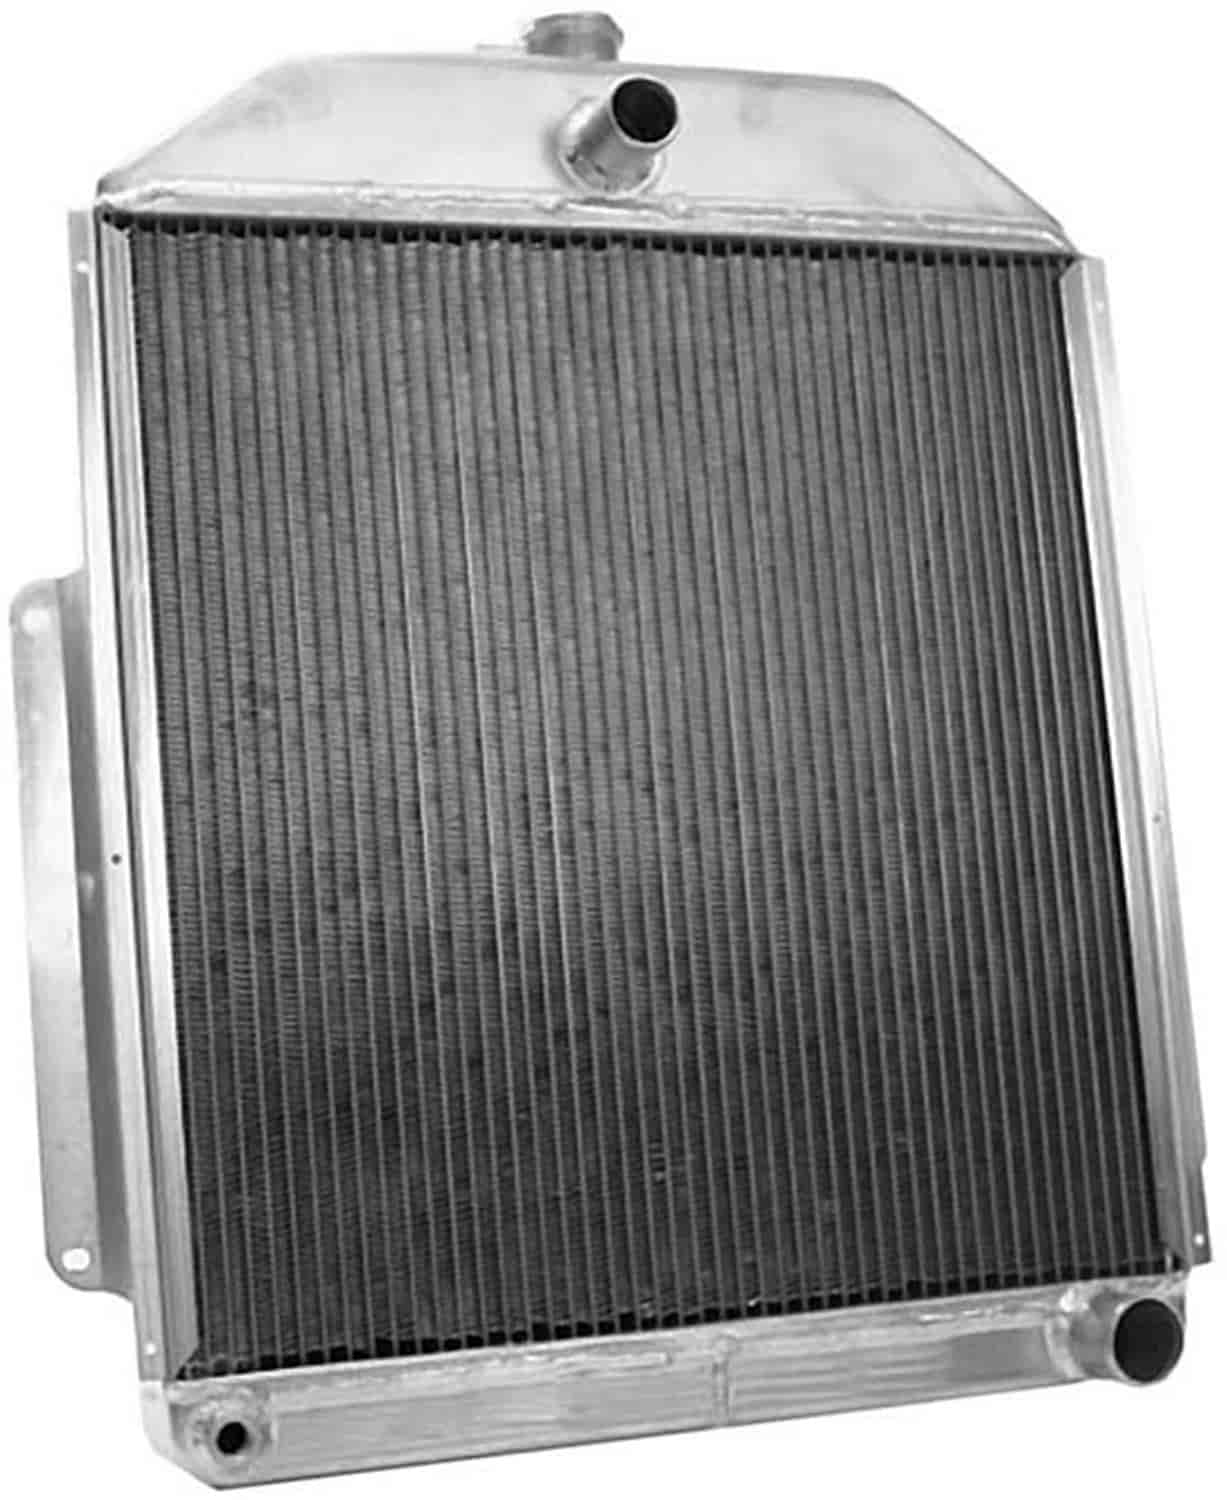 ExactFit Radiator for 1942-1952 Ford Truck with Early Chevy V8